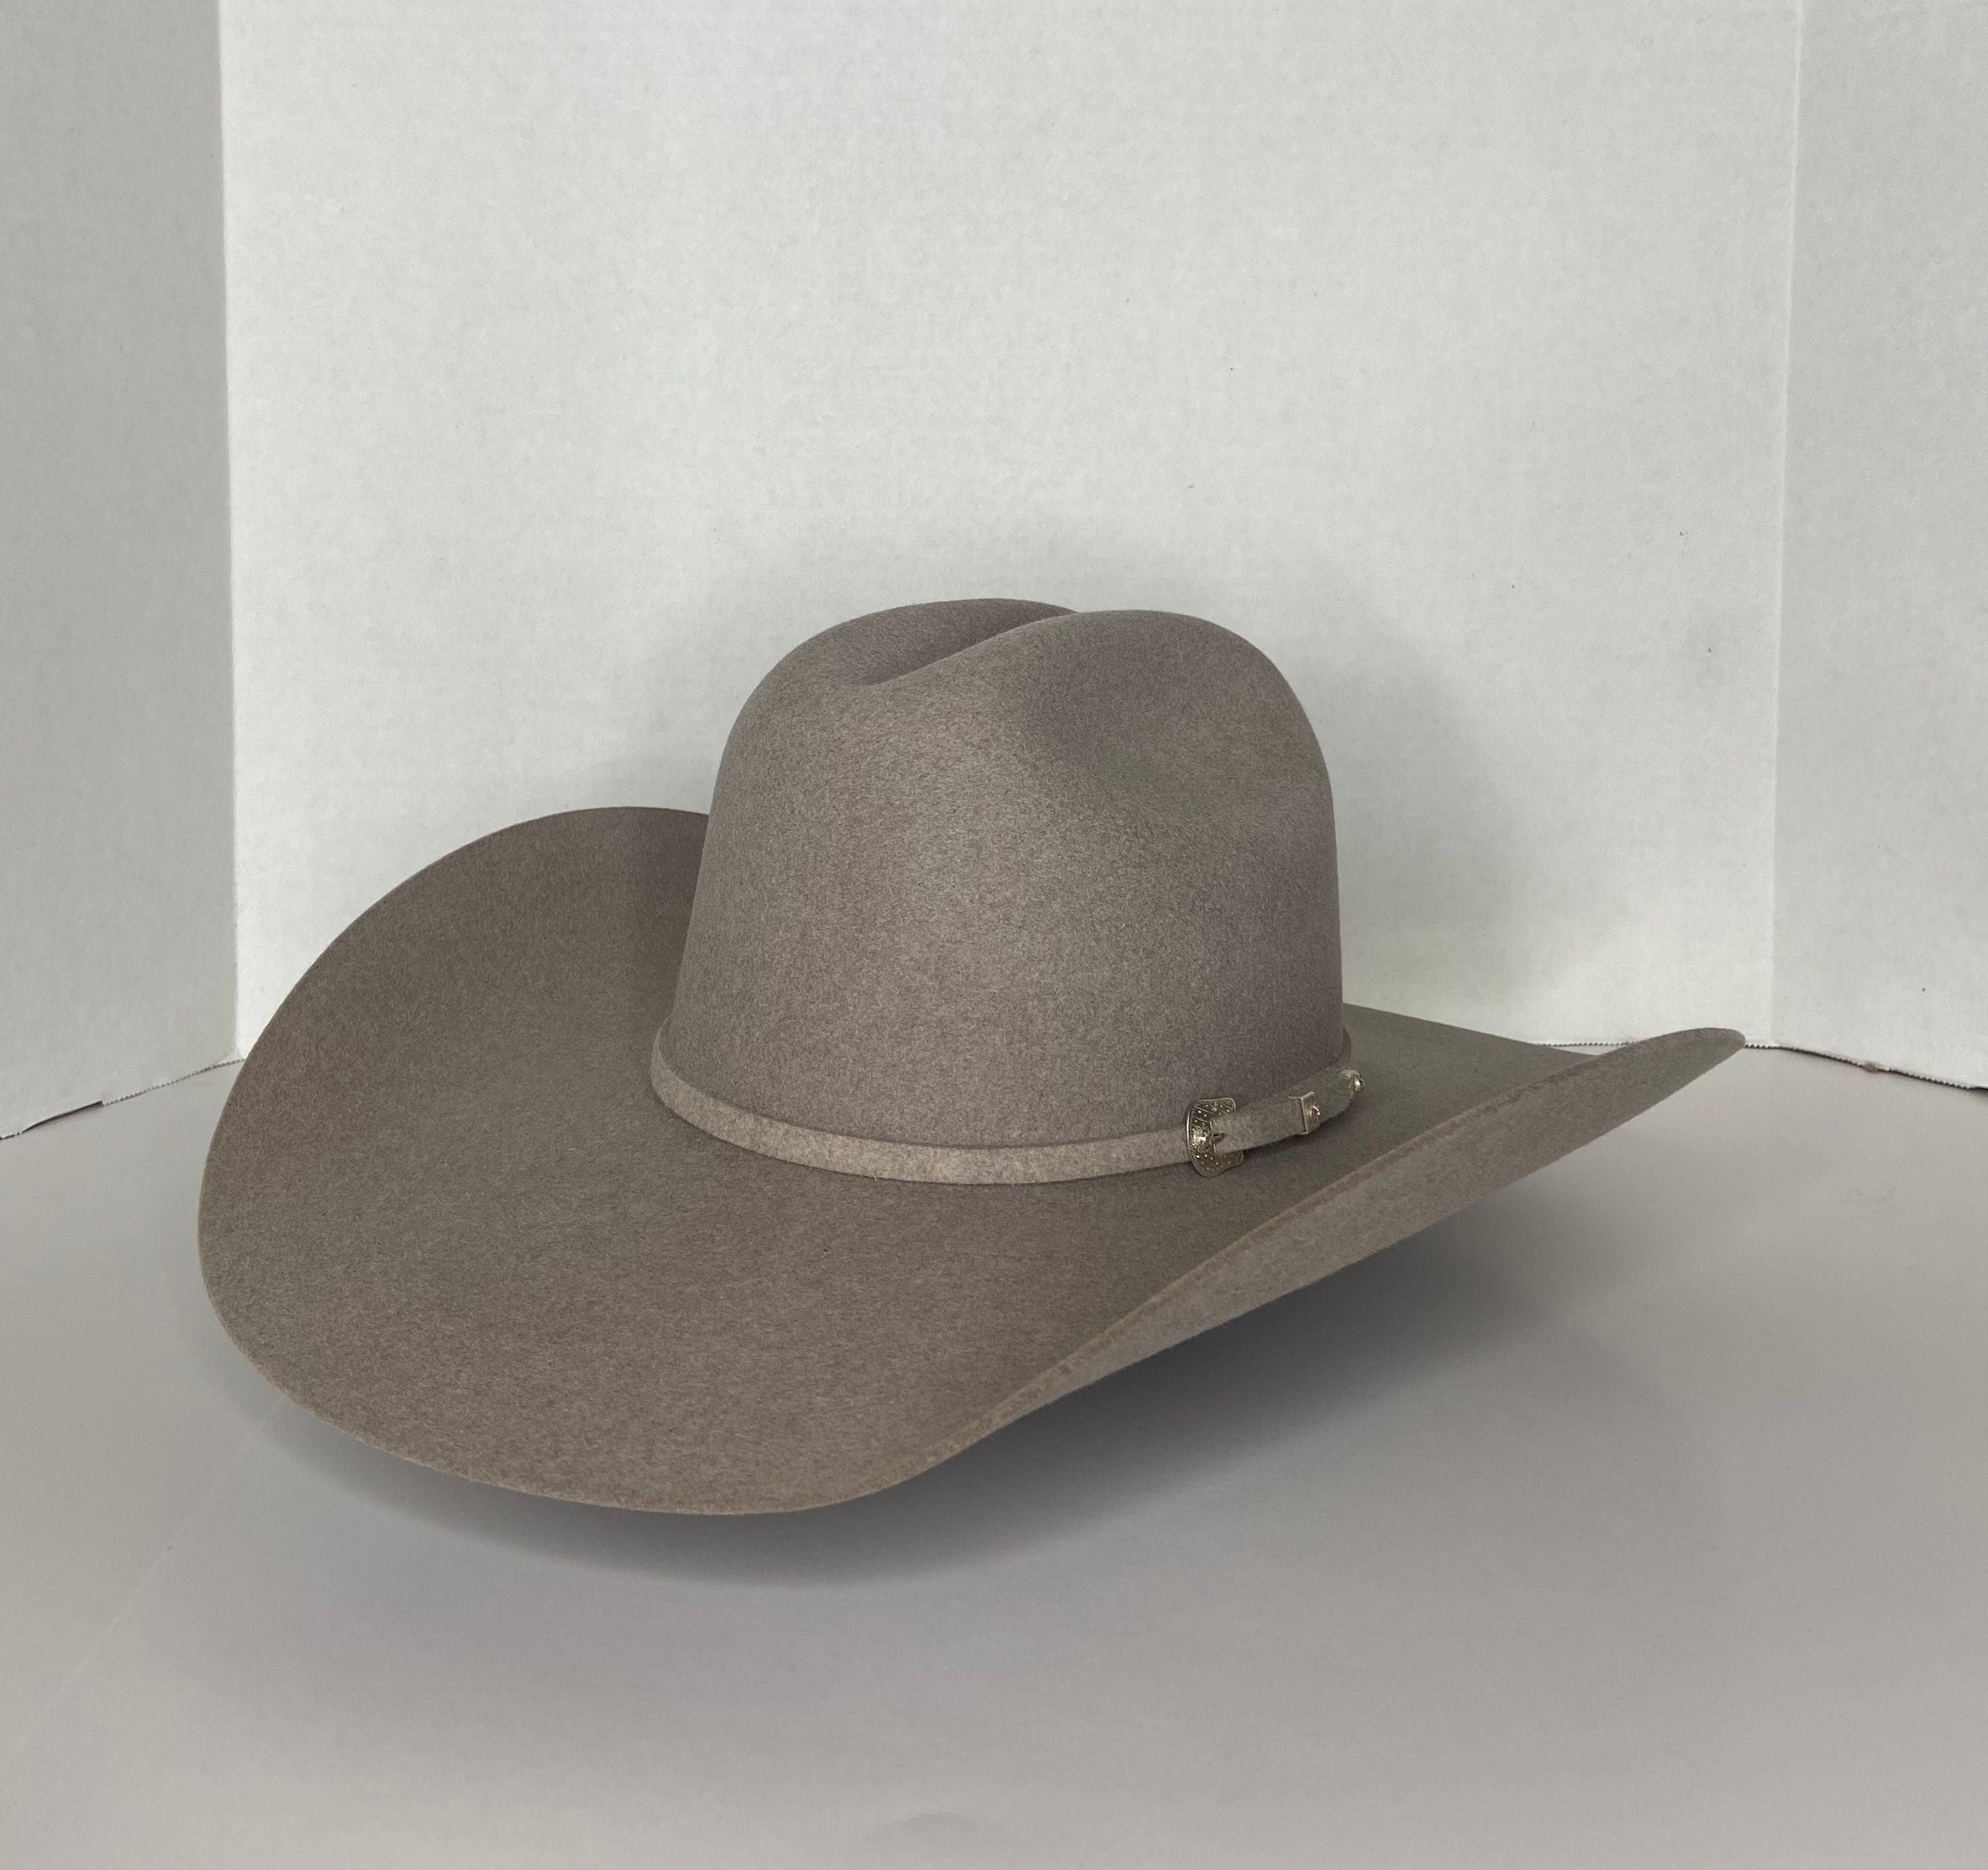 SERRATELLI 20X MONTANA NATURAL FELT HAT – Yee Haw Ranch Outfitters